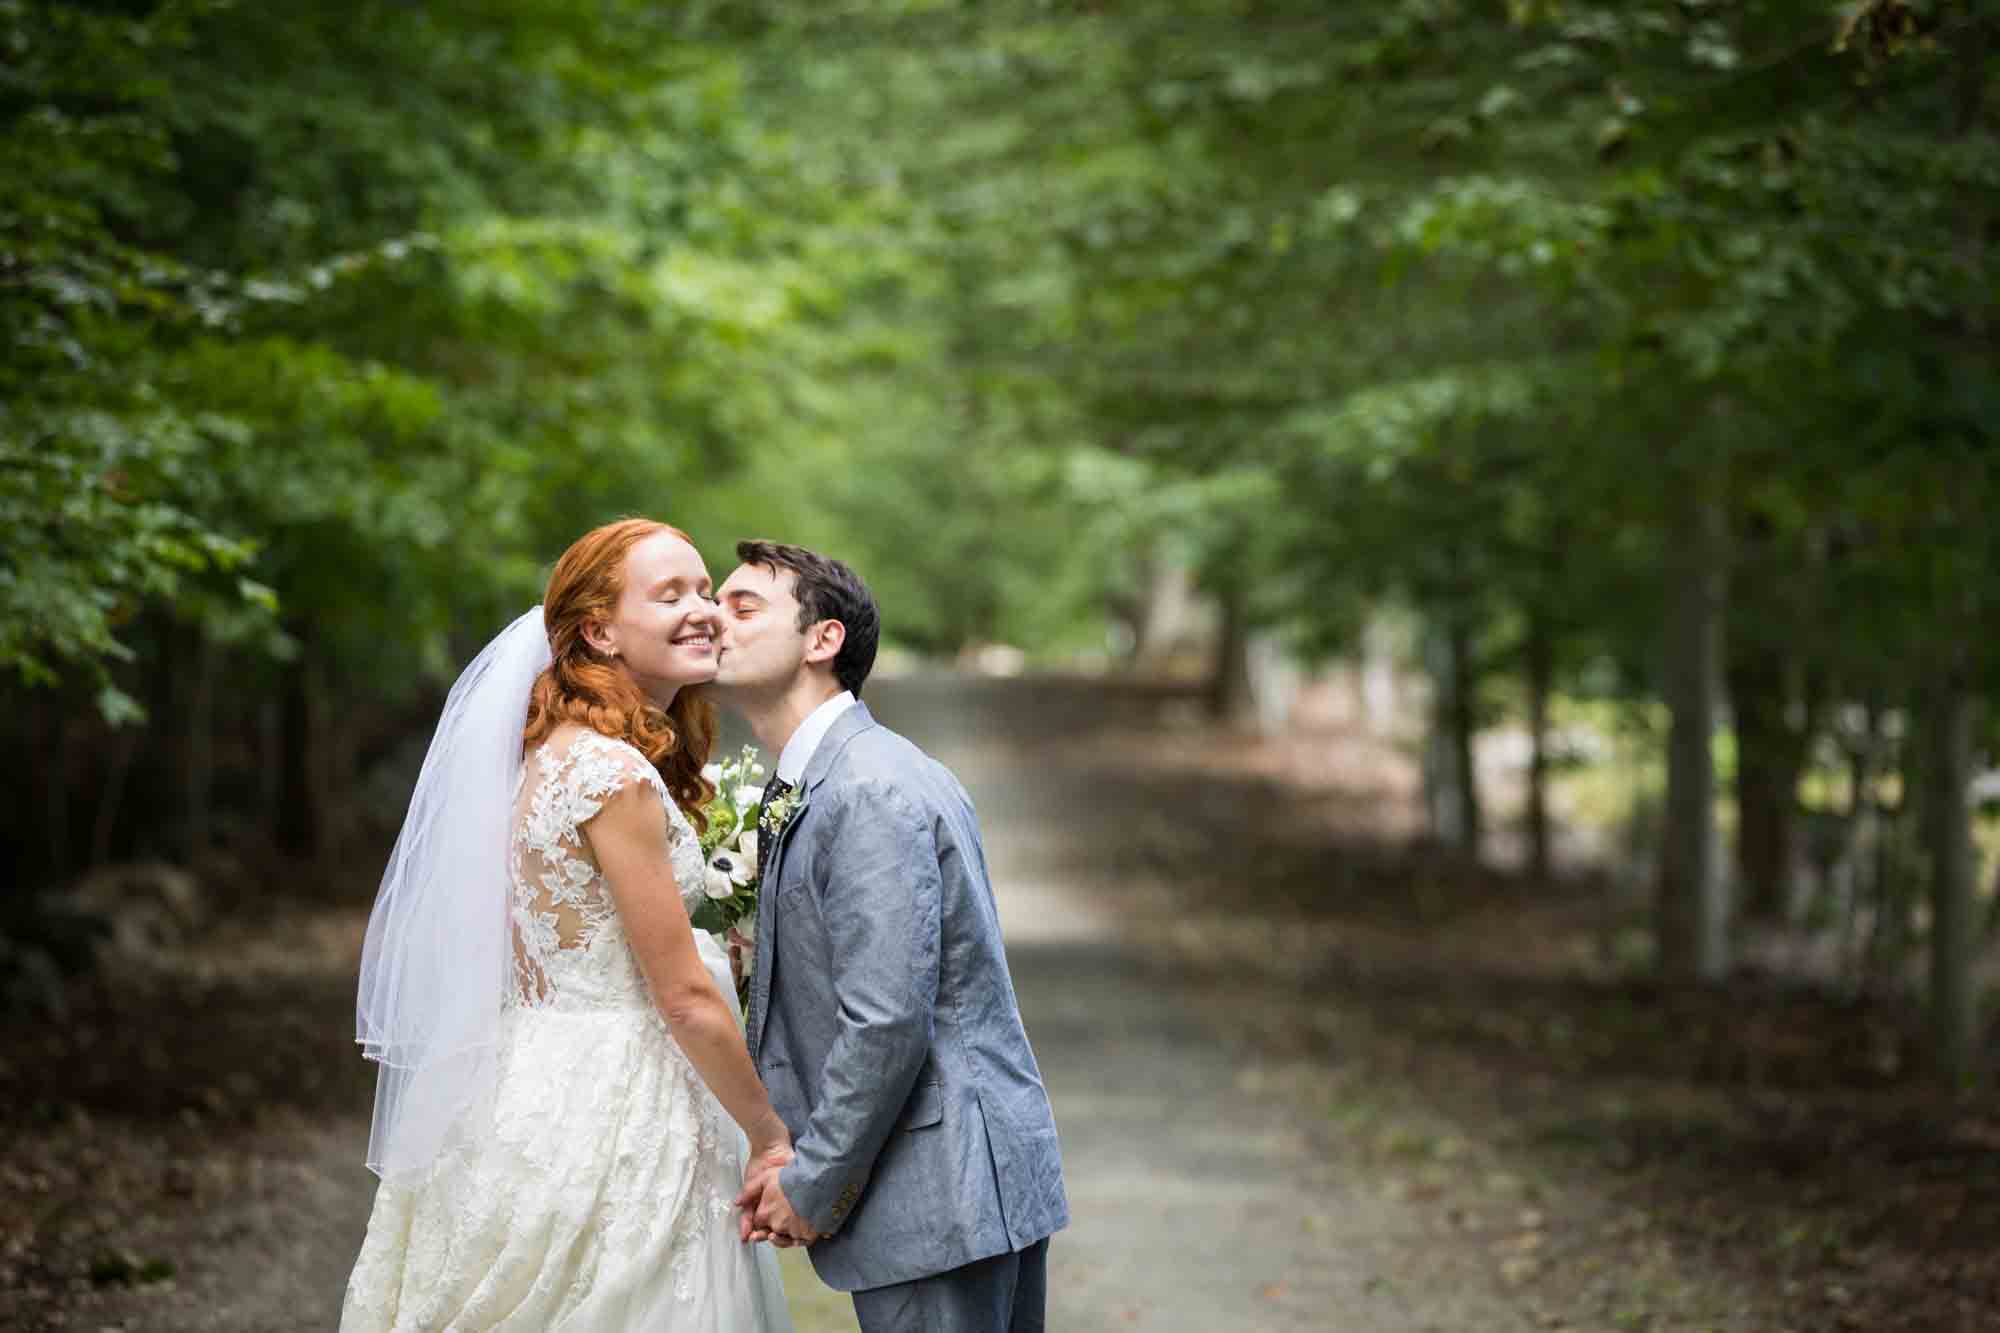 Groom kissing bride on the cheek in driveway for an article on backyard wedding tips